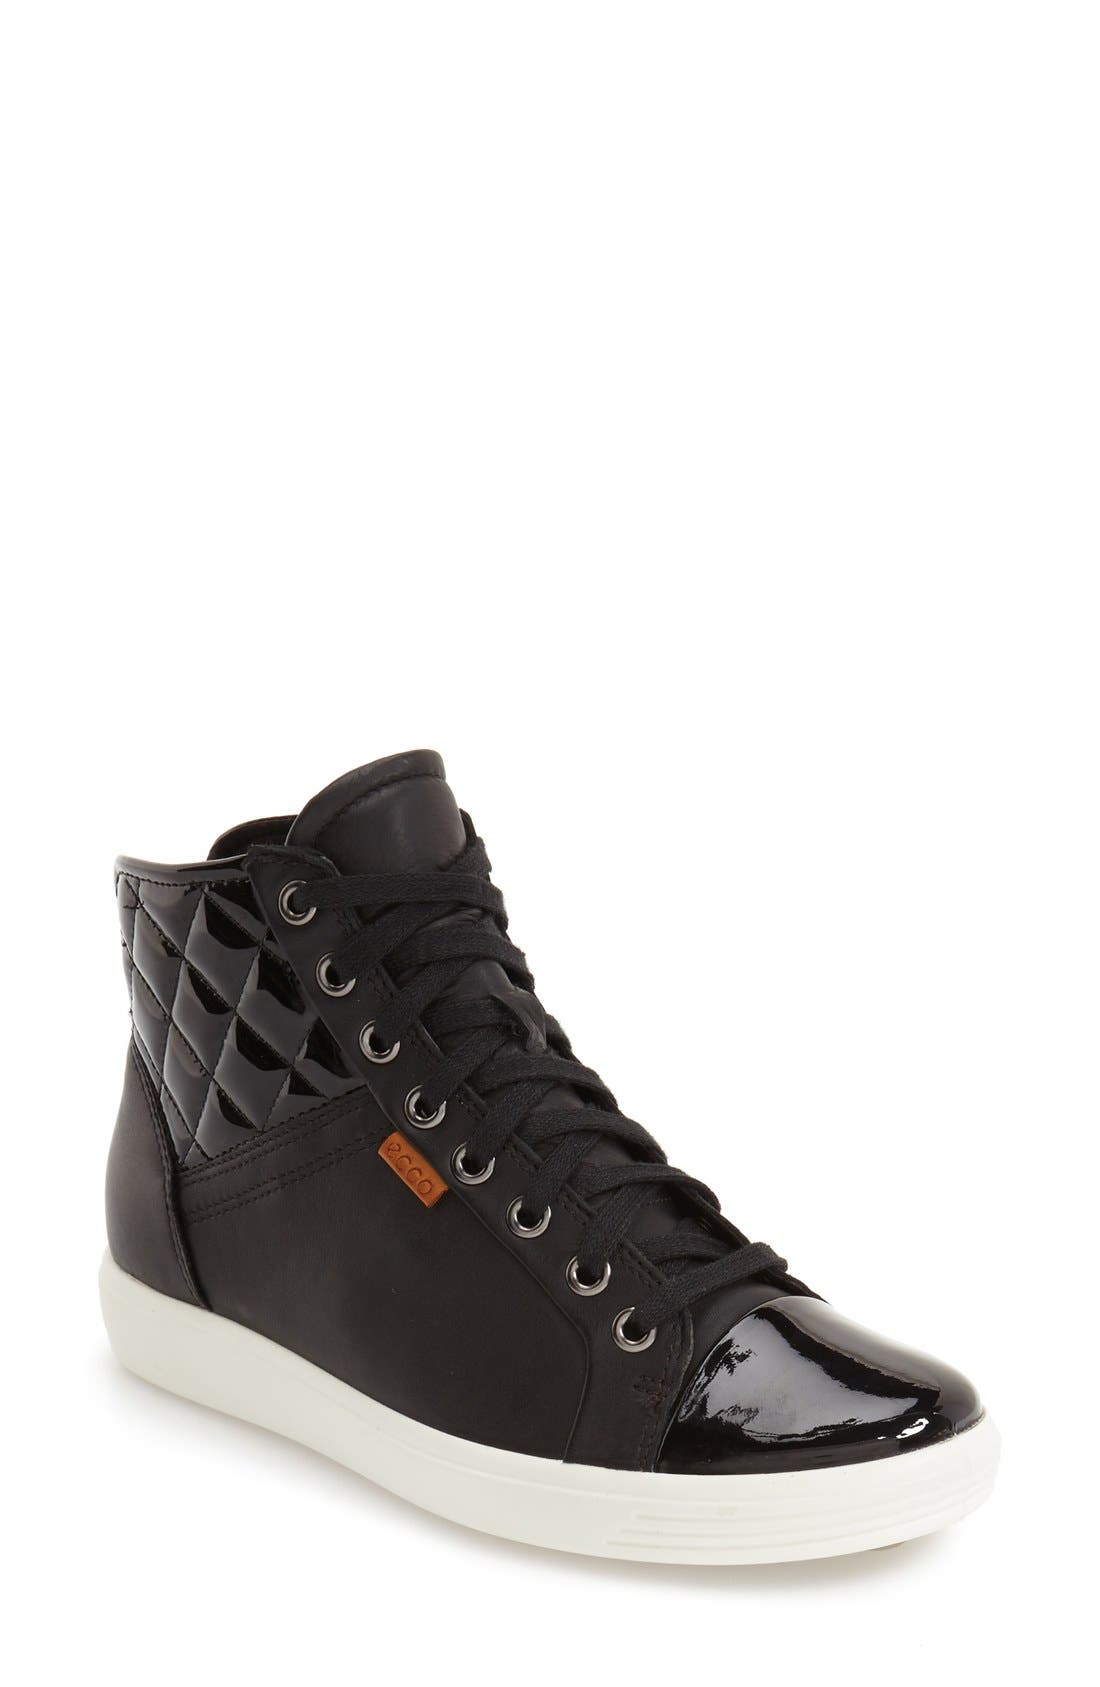 ECCO 'Soft 7' Quilted High Top Sneaker 